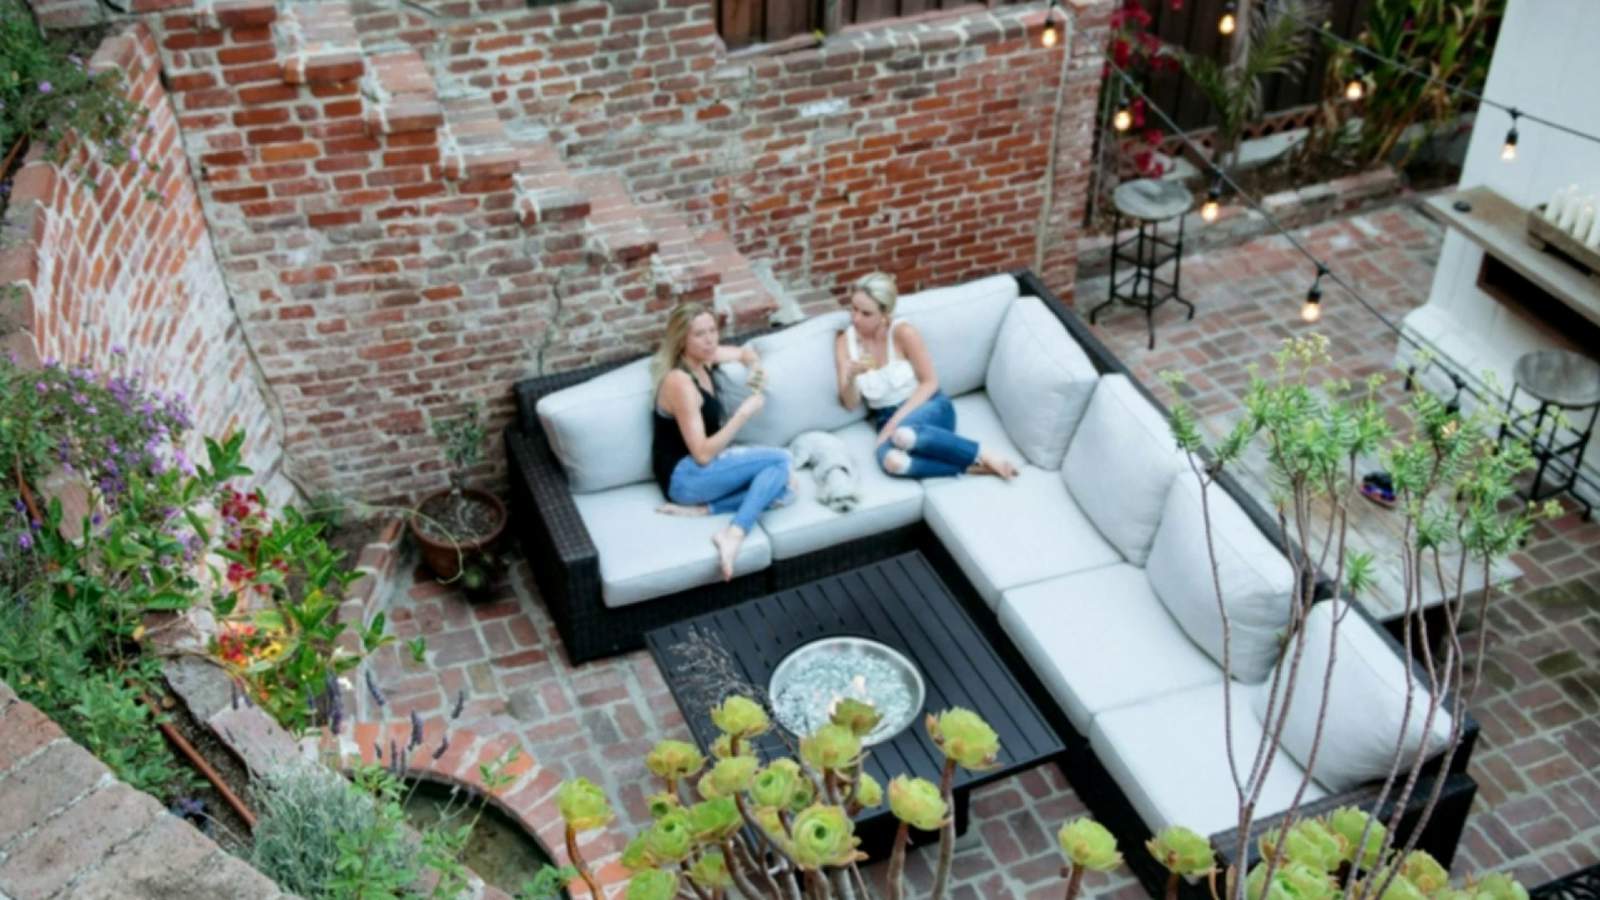 How to prepare your outdoor space for entertaining this spring, without blowing your budget